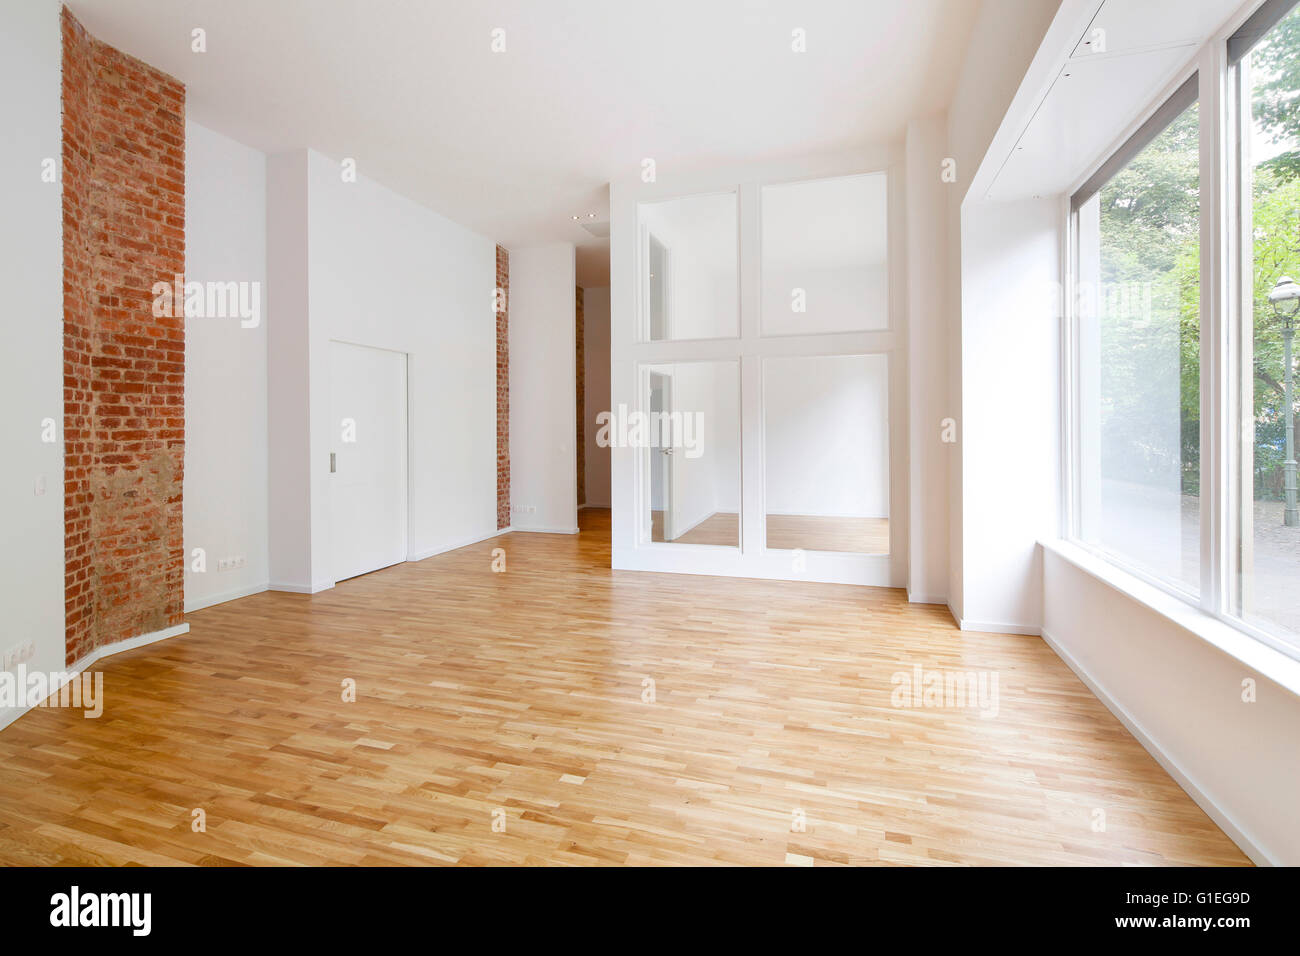 Buro, 53 Reichenberger Strasse. Spacious room with modern layout and exposed brick wall. Large windows and glass partition. Stock Photo